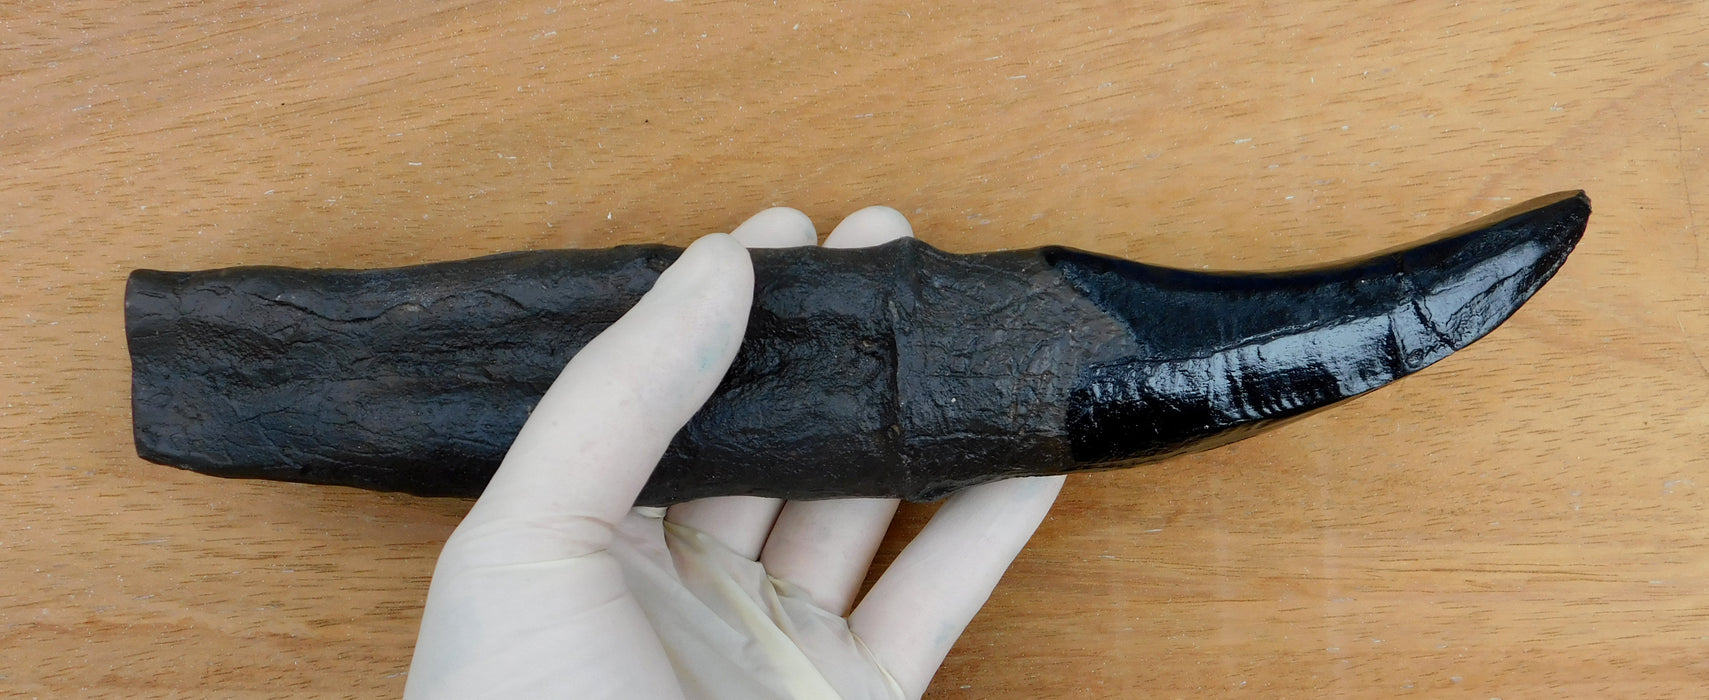 Tyrannosaurus rex Tooth Cast - 27cm Long (From Real Tooth)